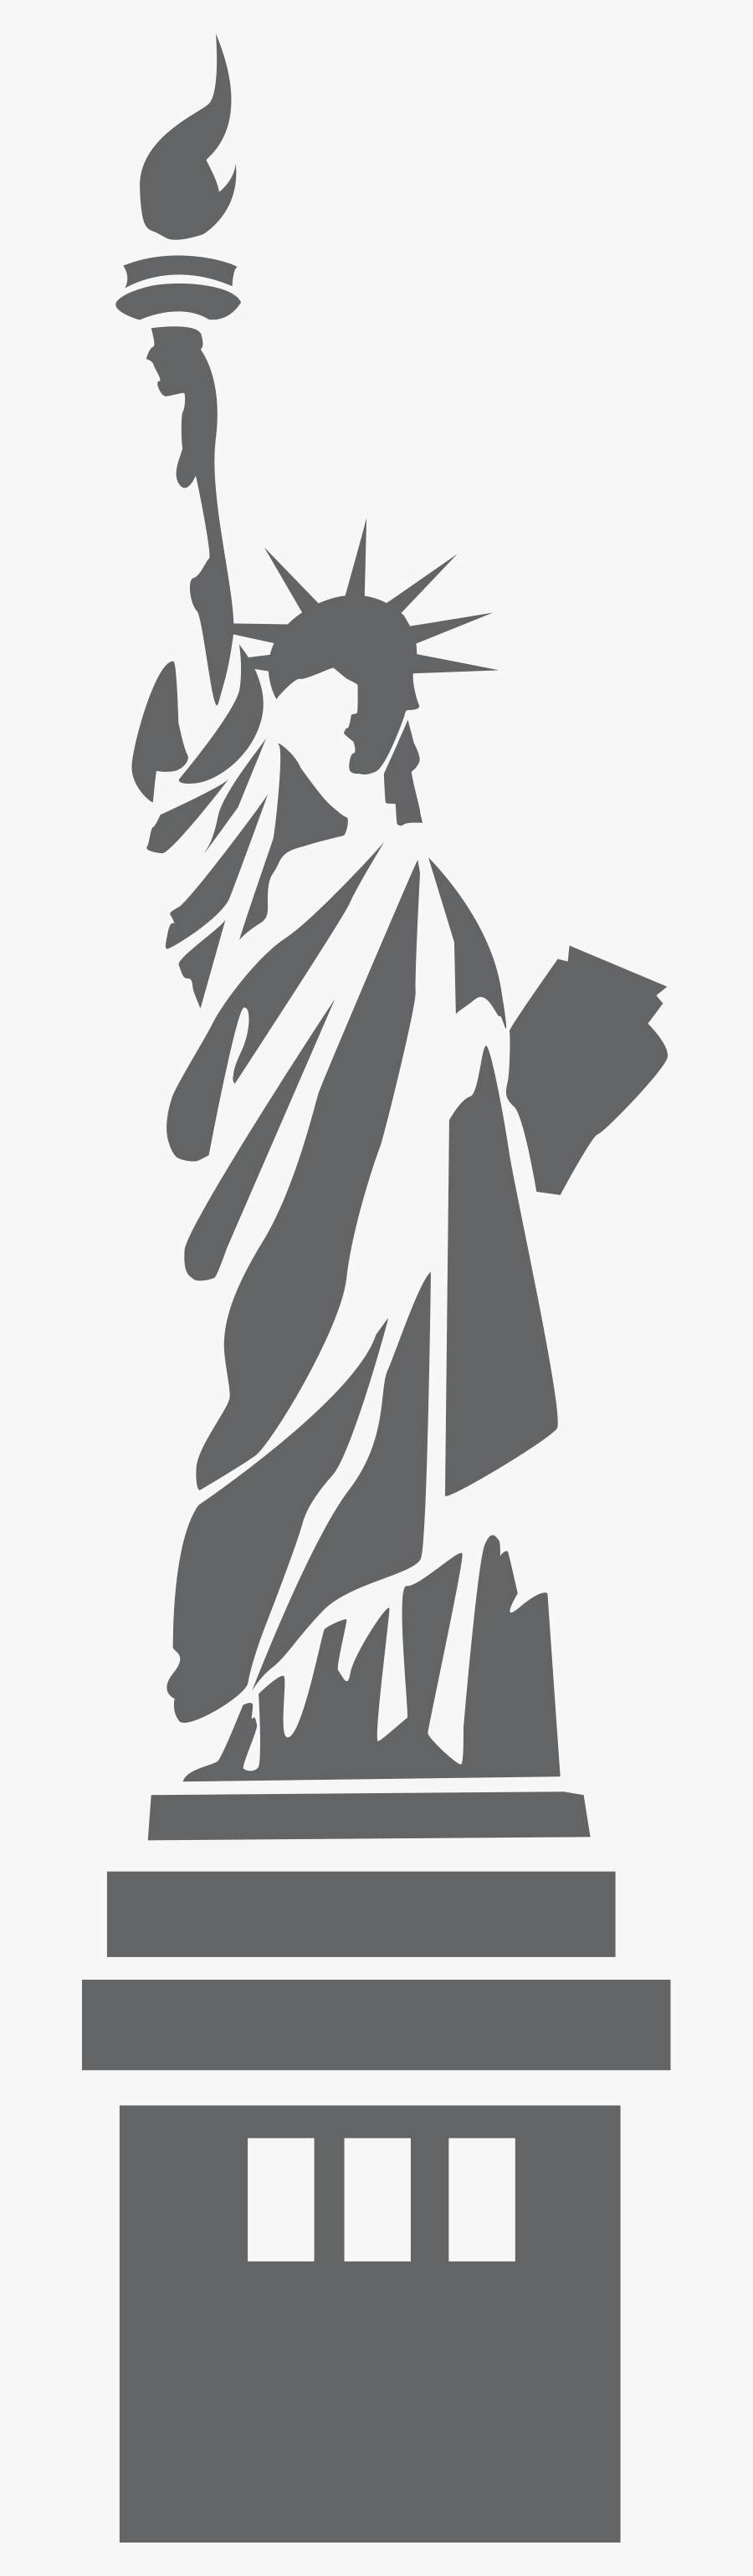 Statue Of Liberty Clipart Black And White - Stencil Statue Of Liberty, Transparent Clipart